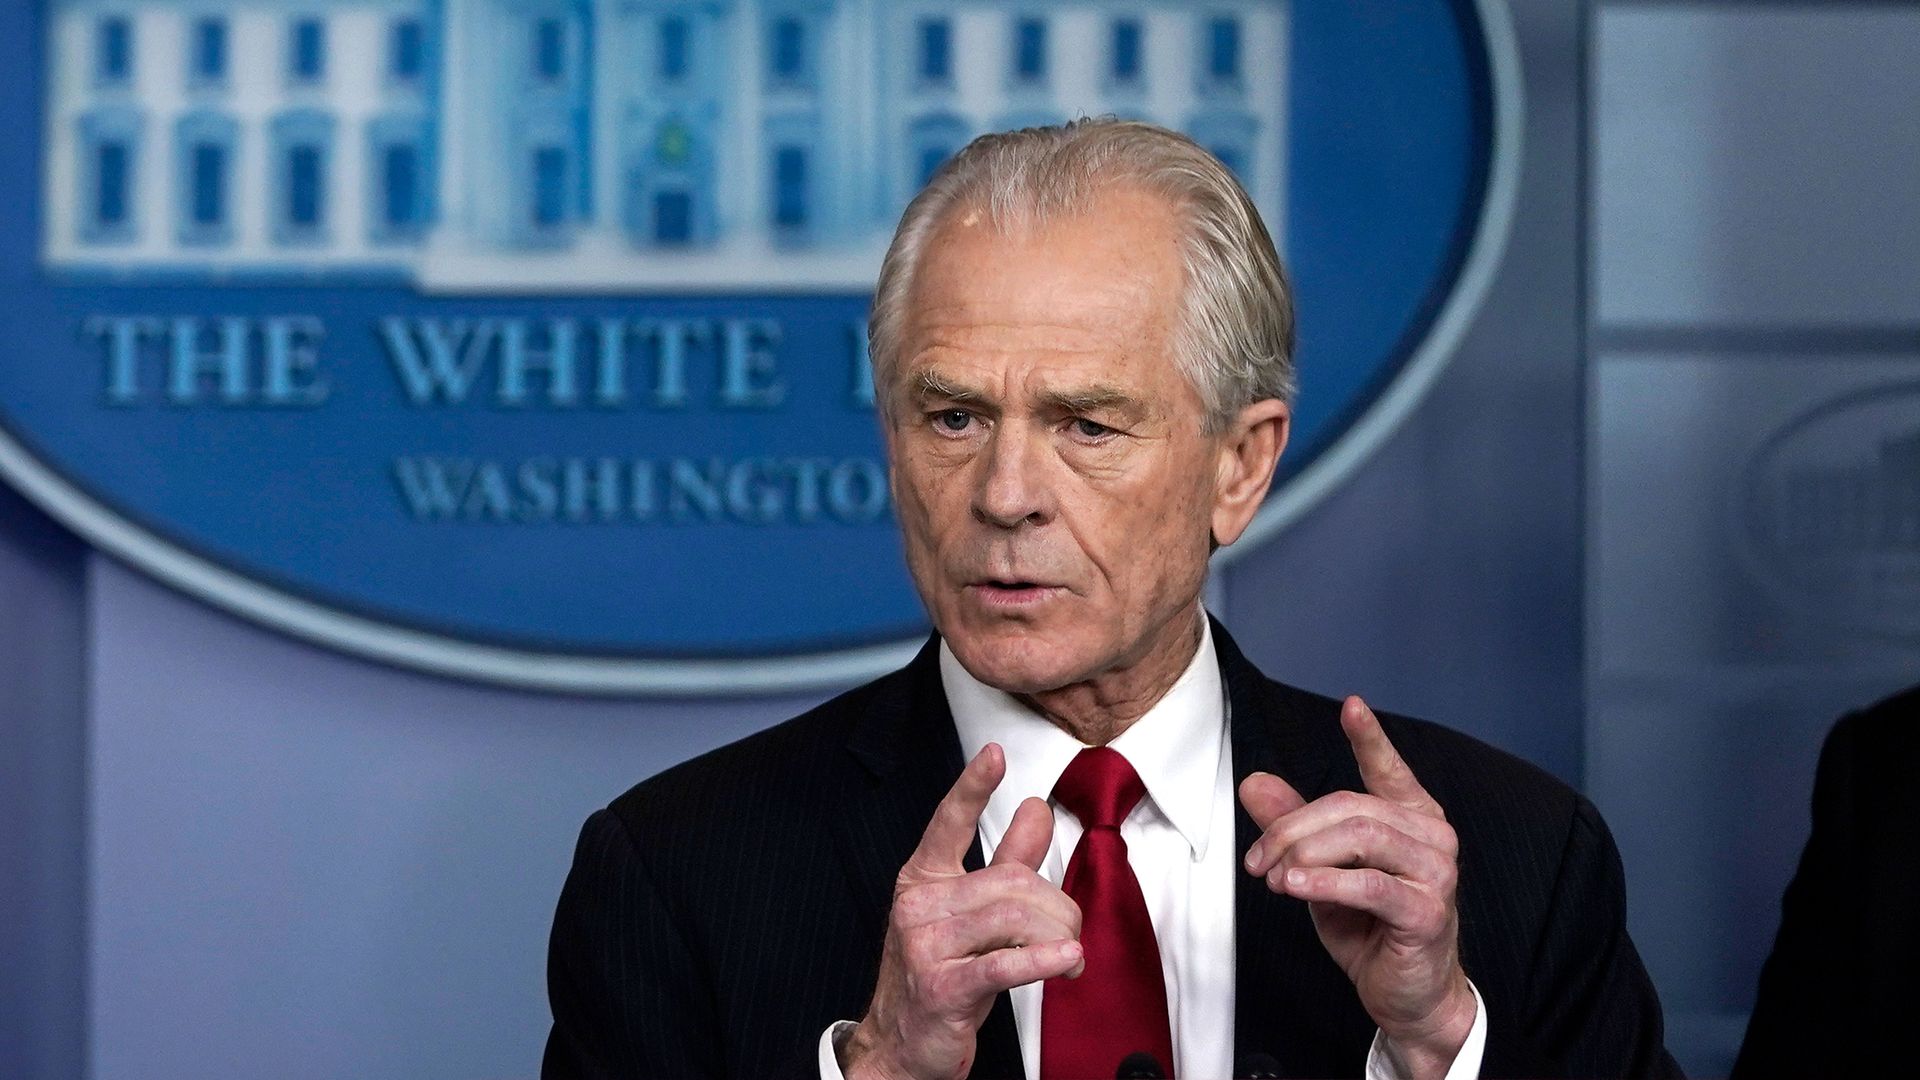 White House Trade and Manufacturing Policy Director Peter Navarro speaks during a briefing on the coronavirus pandemic in the press briefing room of the White House